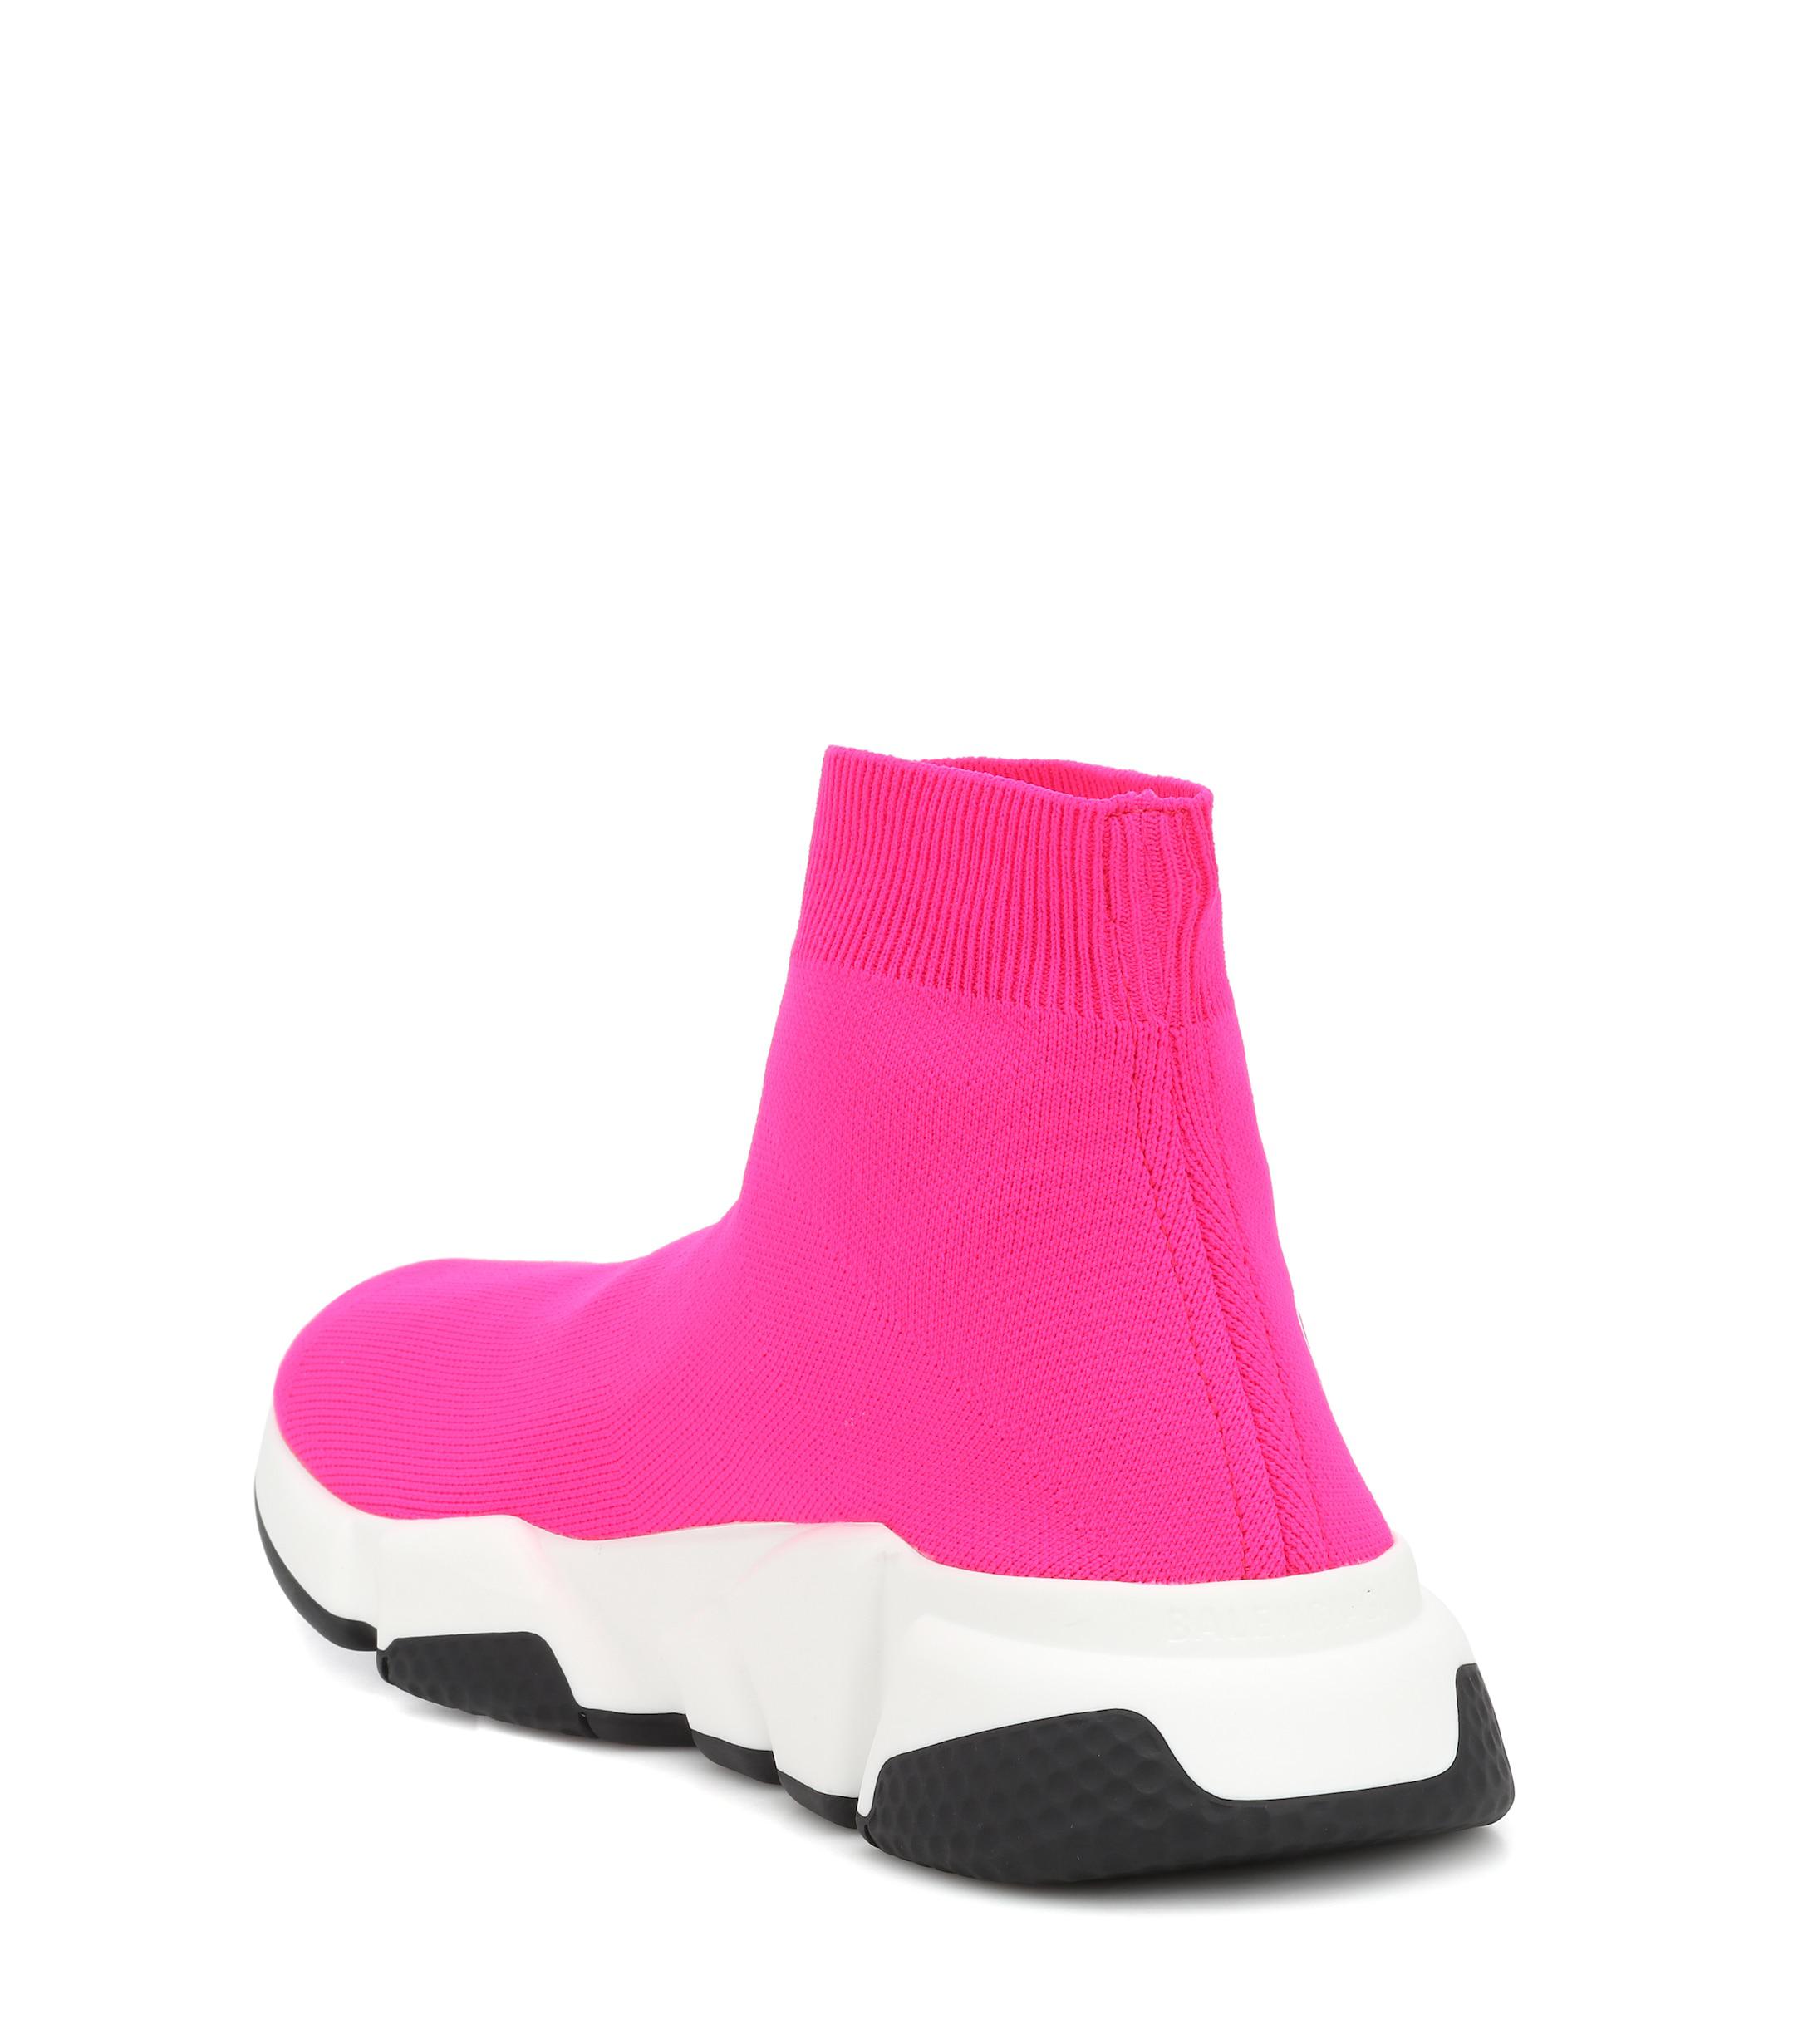 Balenciaga Speed Trainer Sneakers in Pink - Lyst